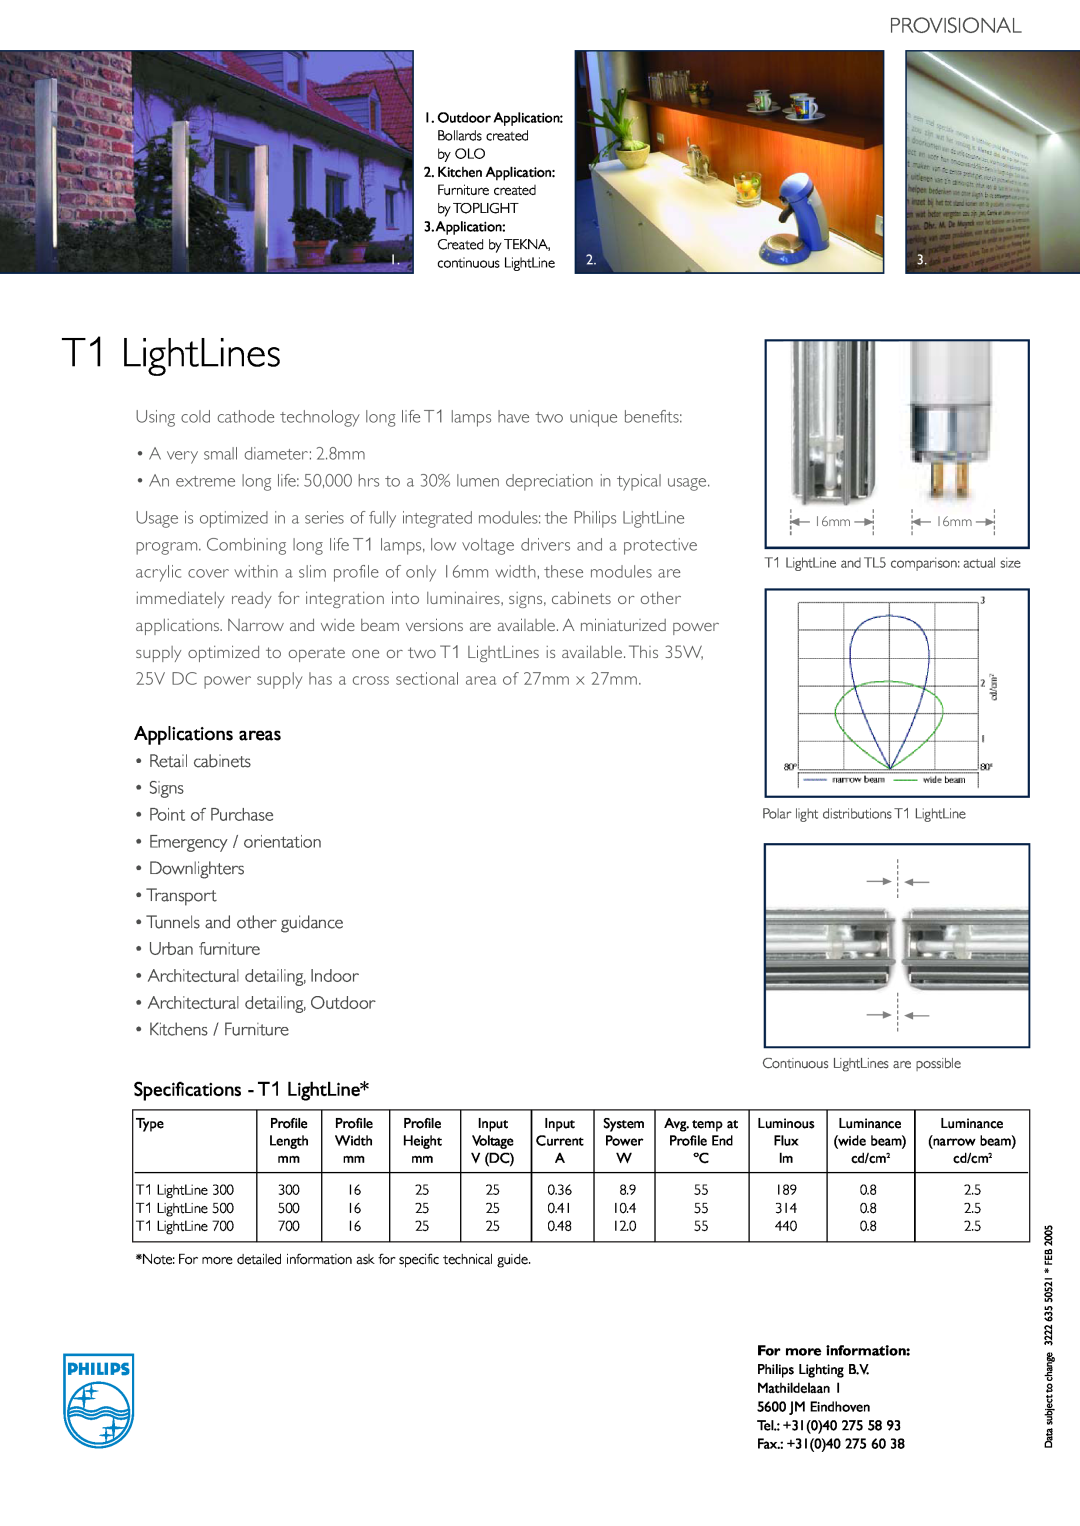 Philips T1 LightLines, Provisional, Applications areas, Specifications - T1 LightLine, A very small diameter 2.8mm 